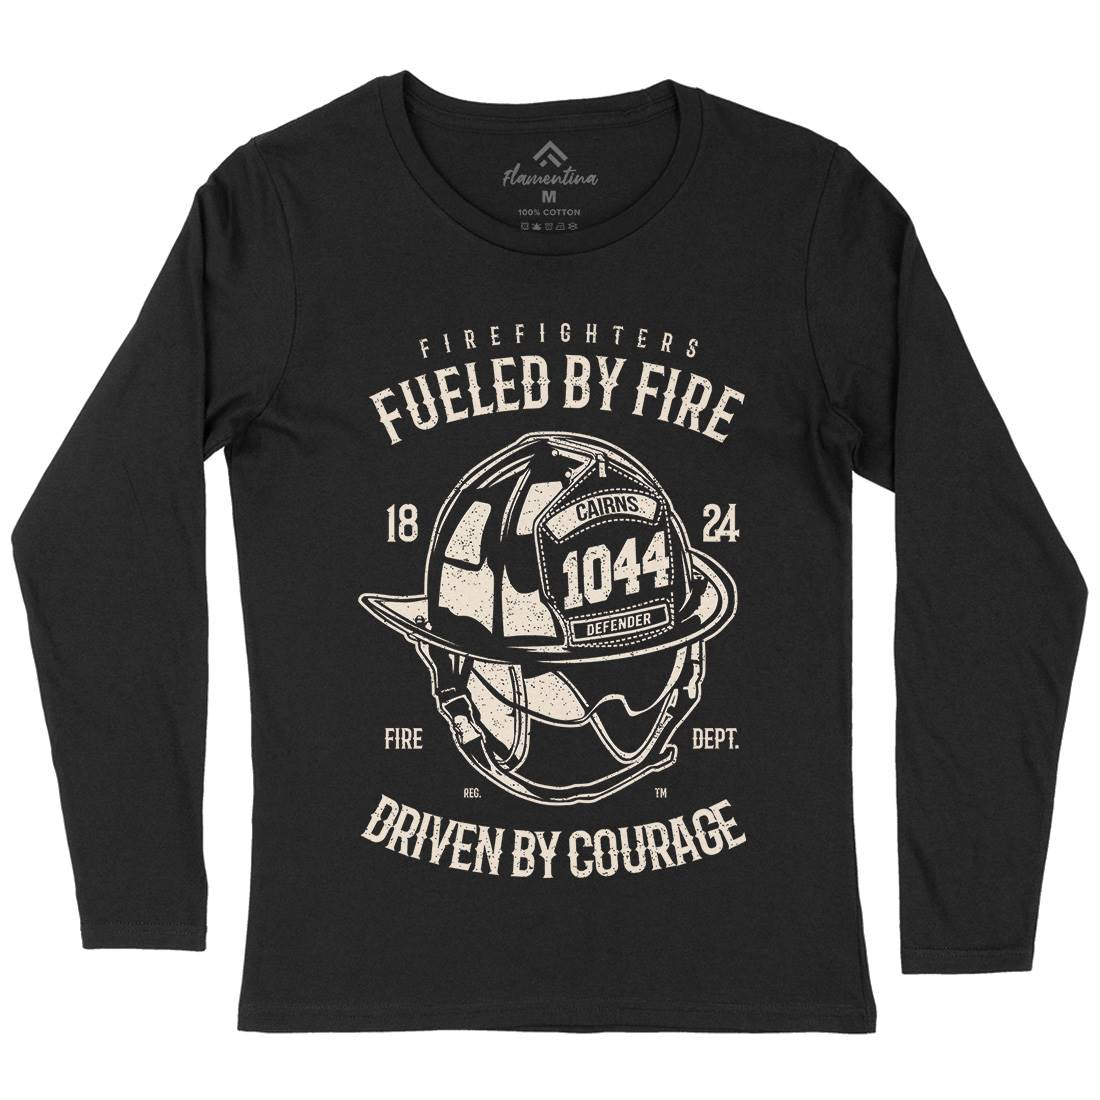 Fuelled By Fire Womens Long Sleeve T-Shirt Firefighters A667